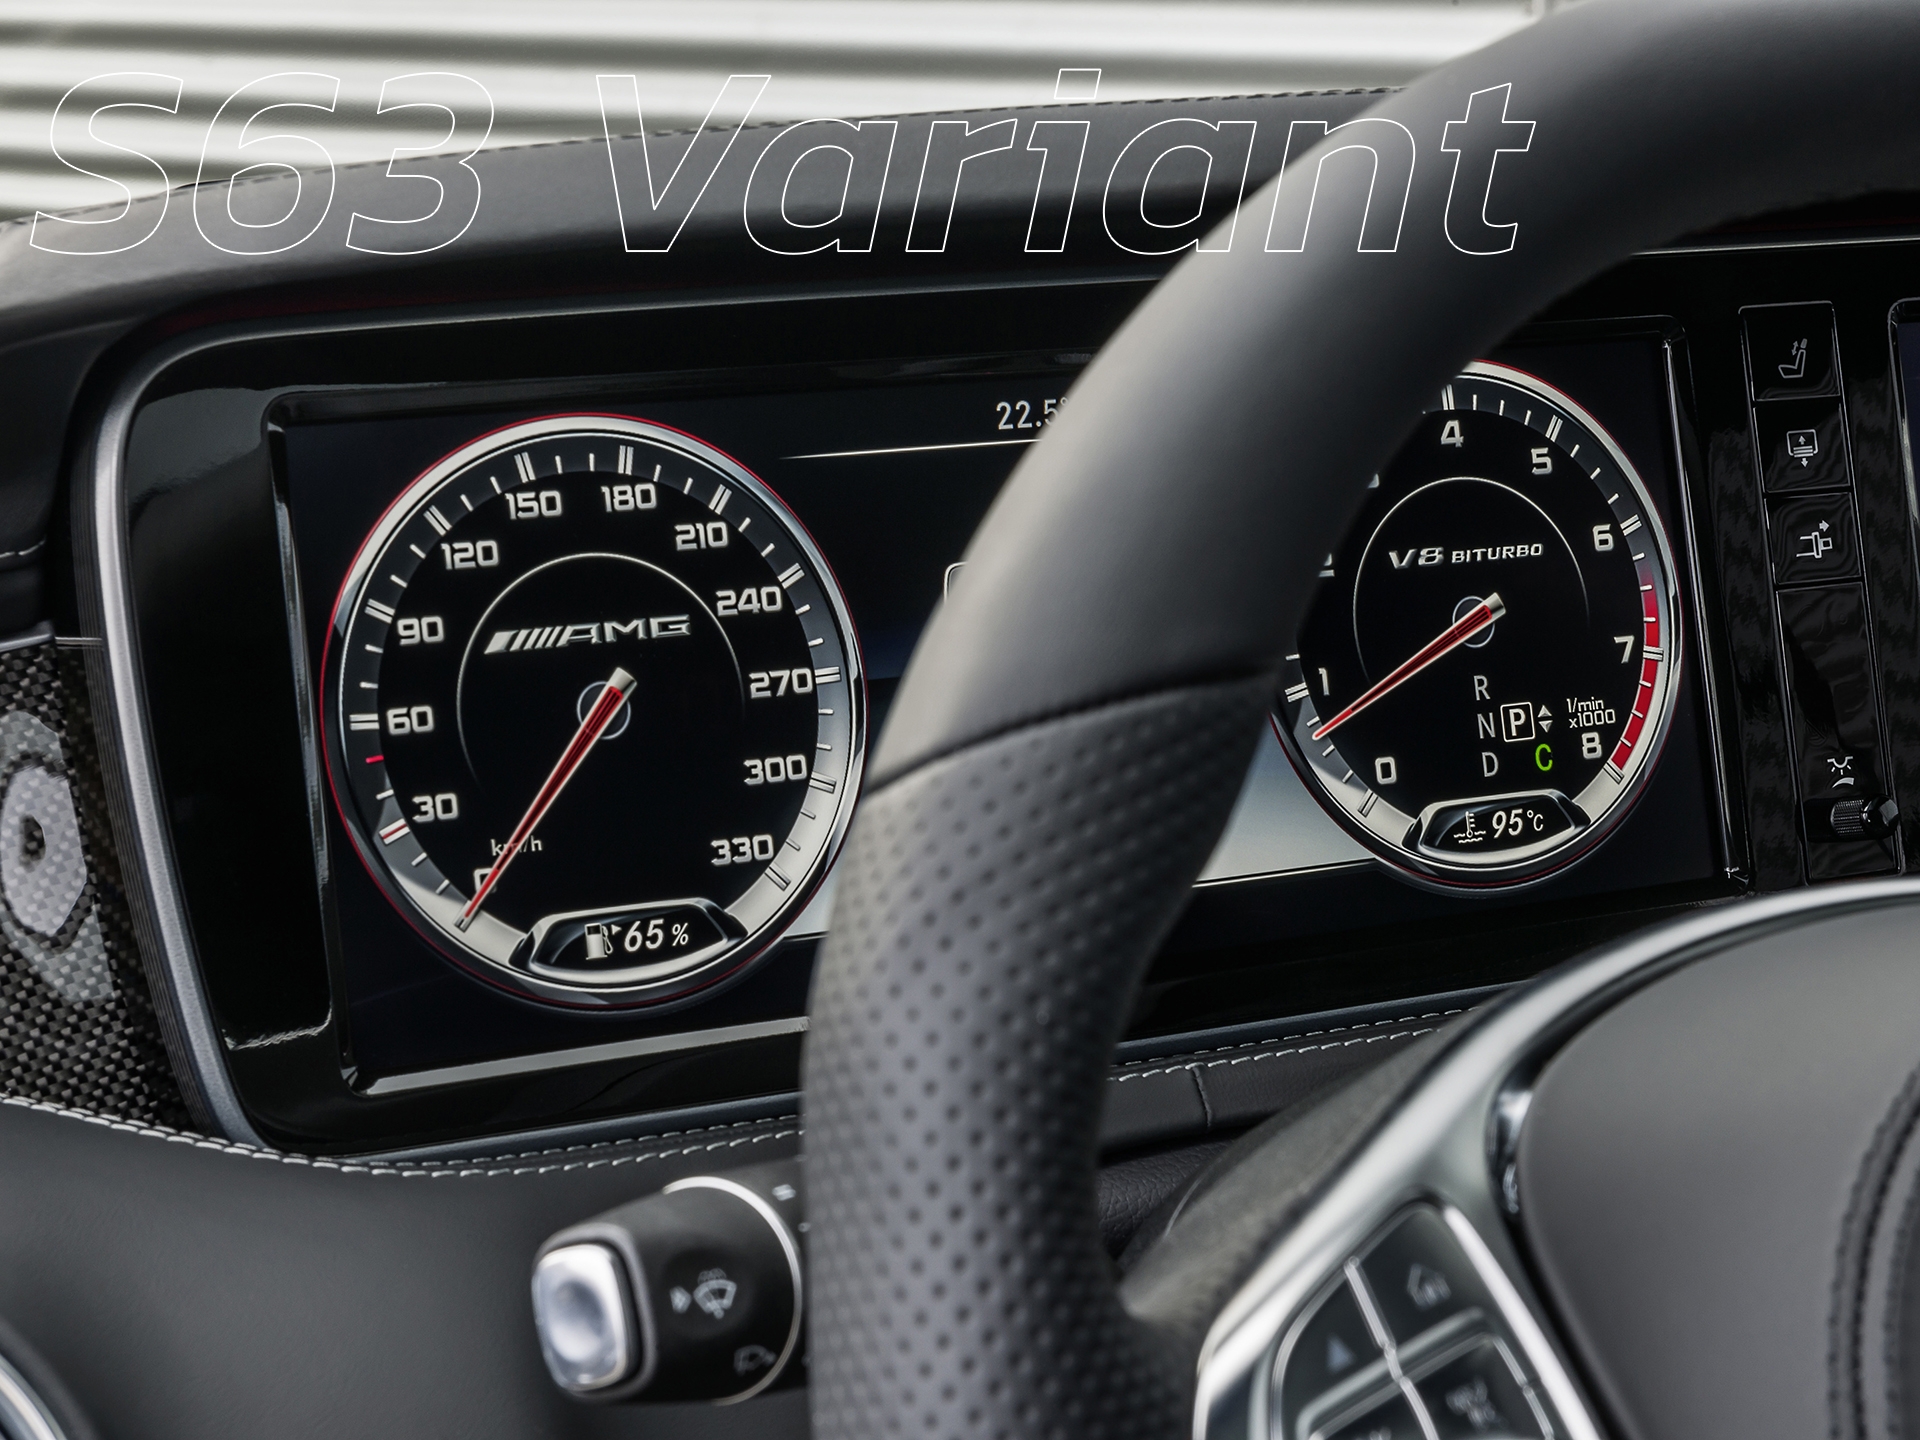 AMG Theme for a Digital Instrument Cluster